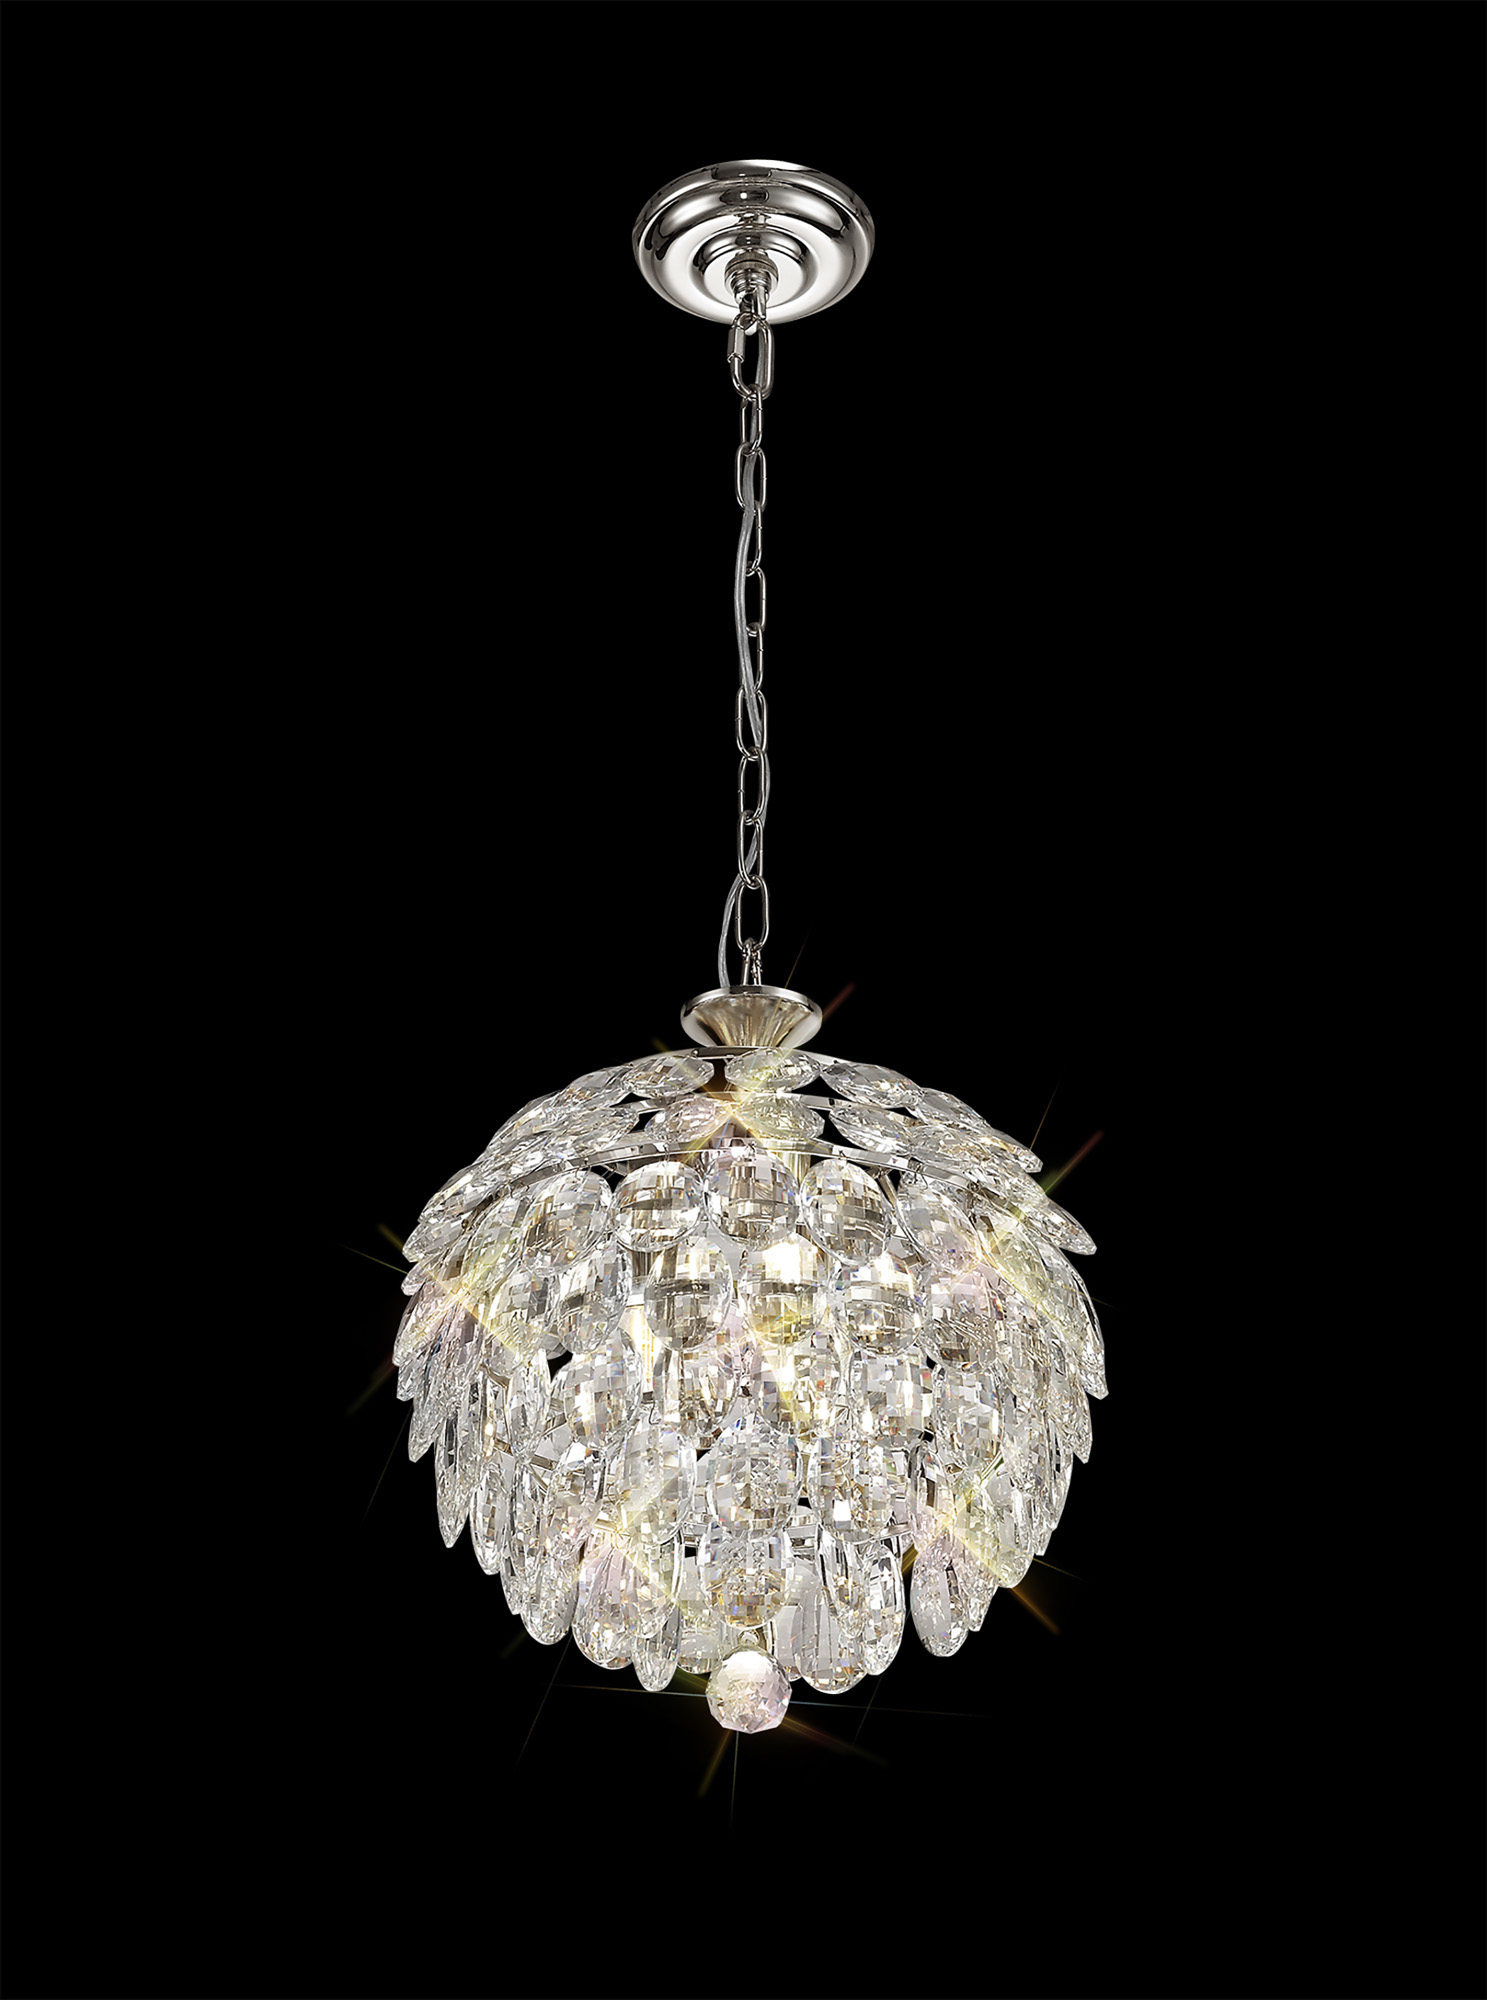 Coniston Polished Chrome Crystal Ceiling Lights Diyas Statement Crystal Fittings